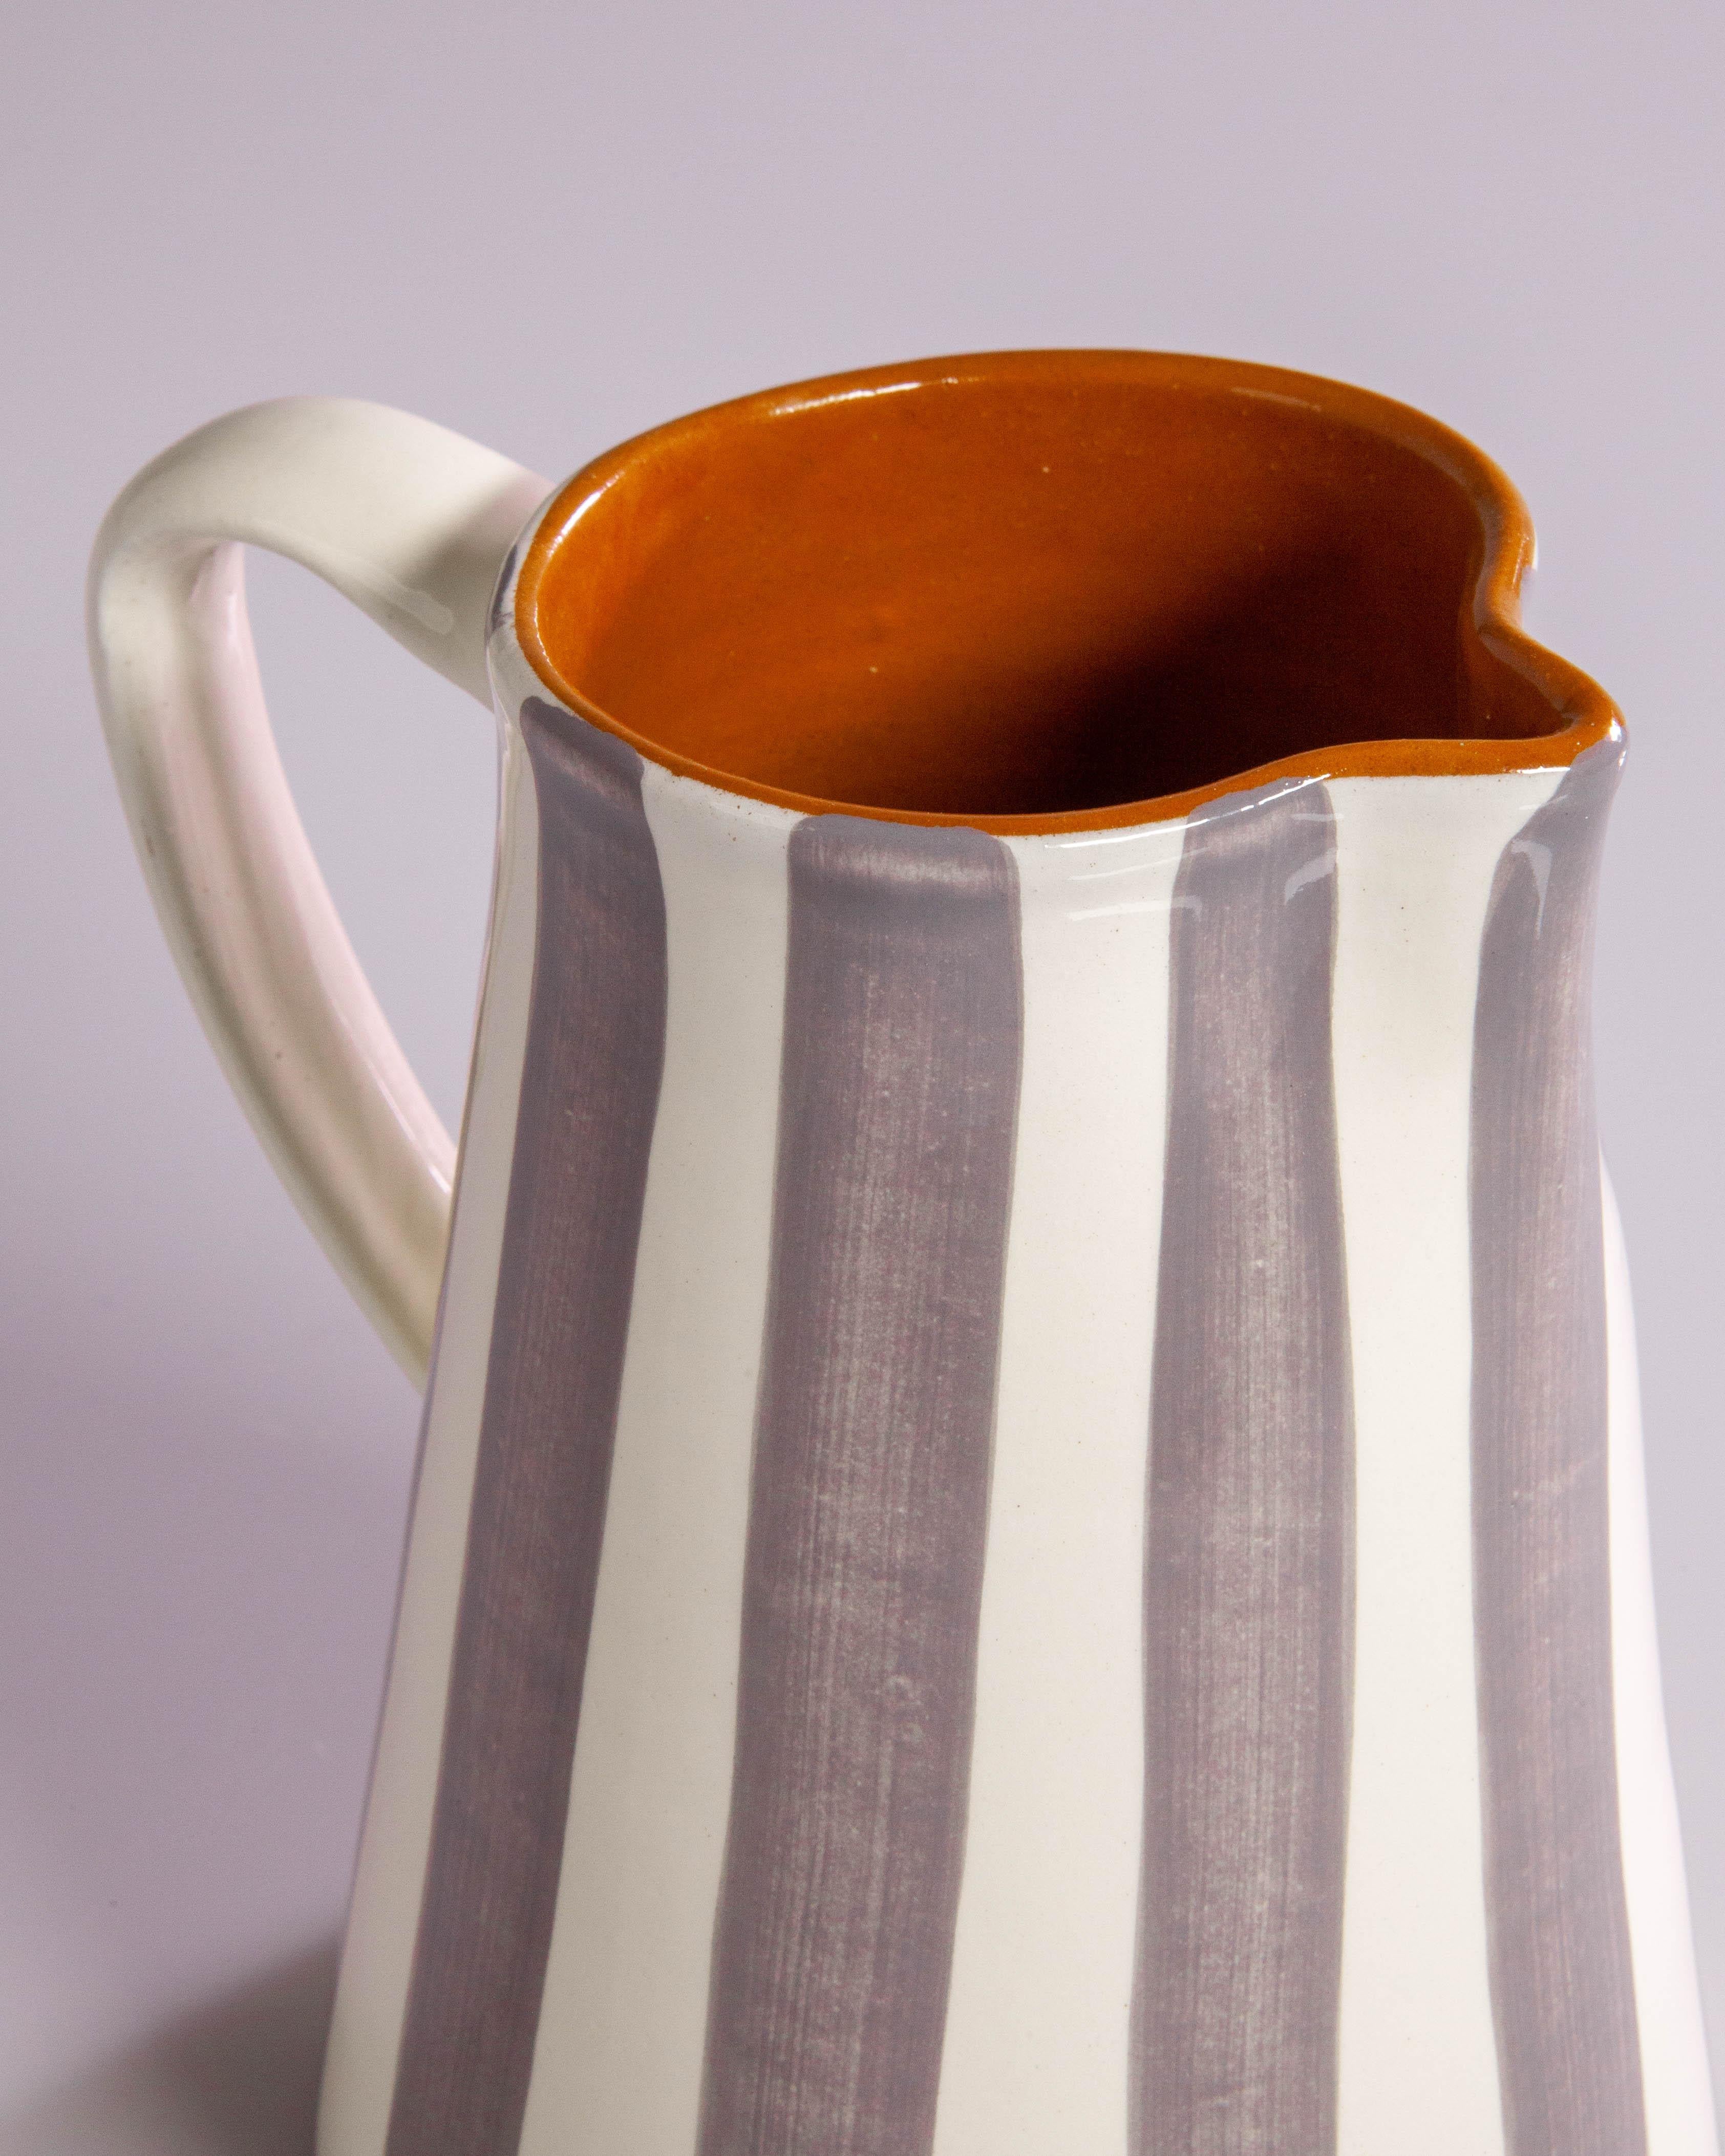 Rustic Handmade Ceramic Striped Jug with Graphic Gray and White Design, in Stock